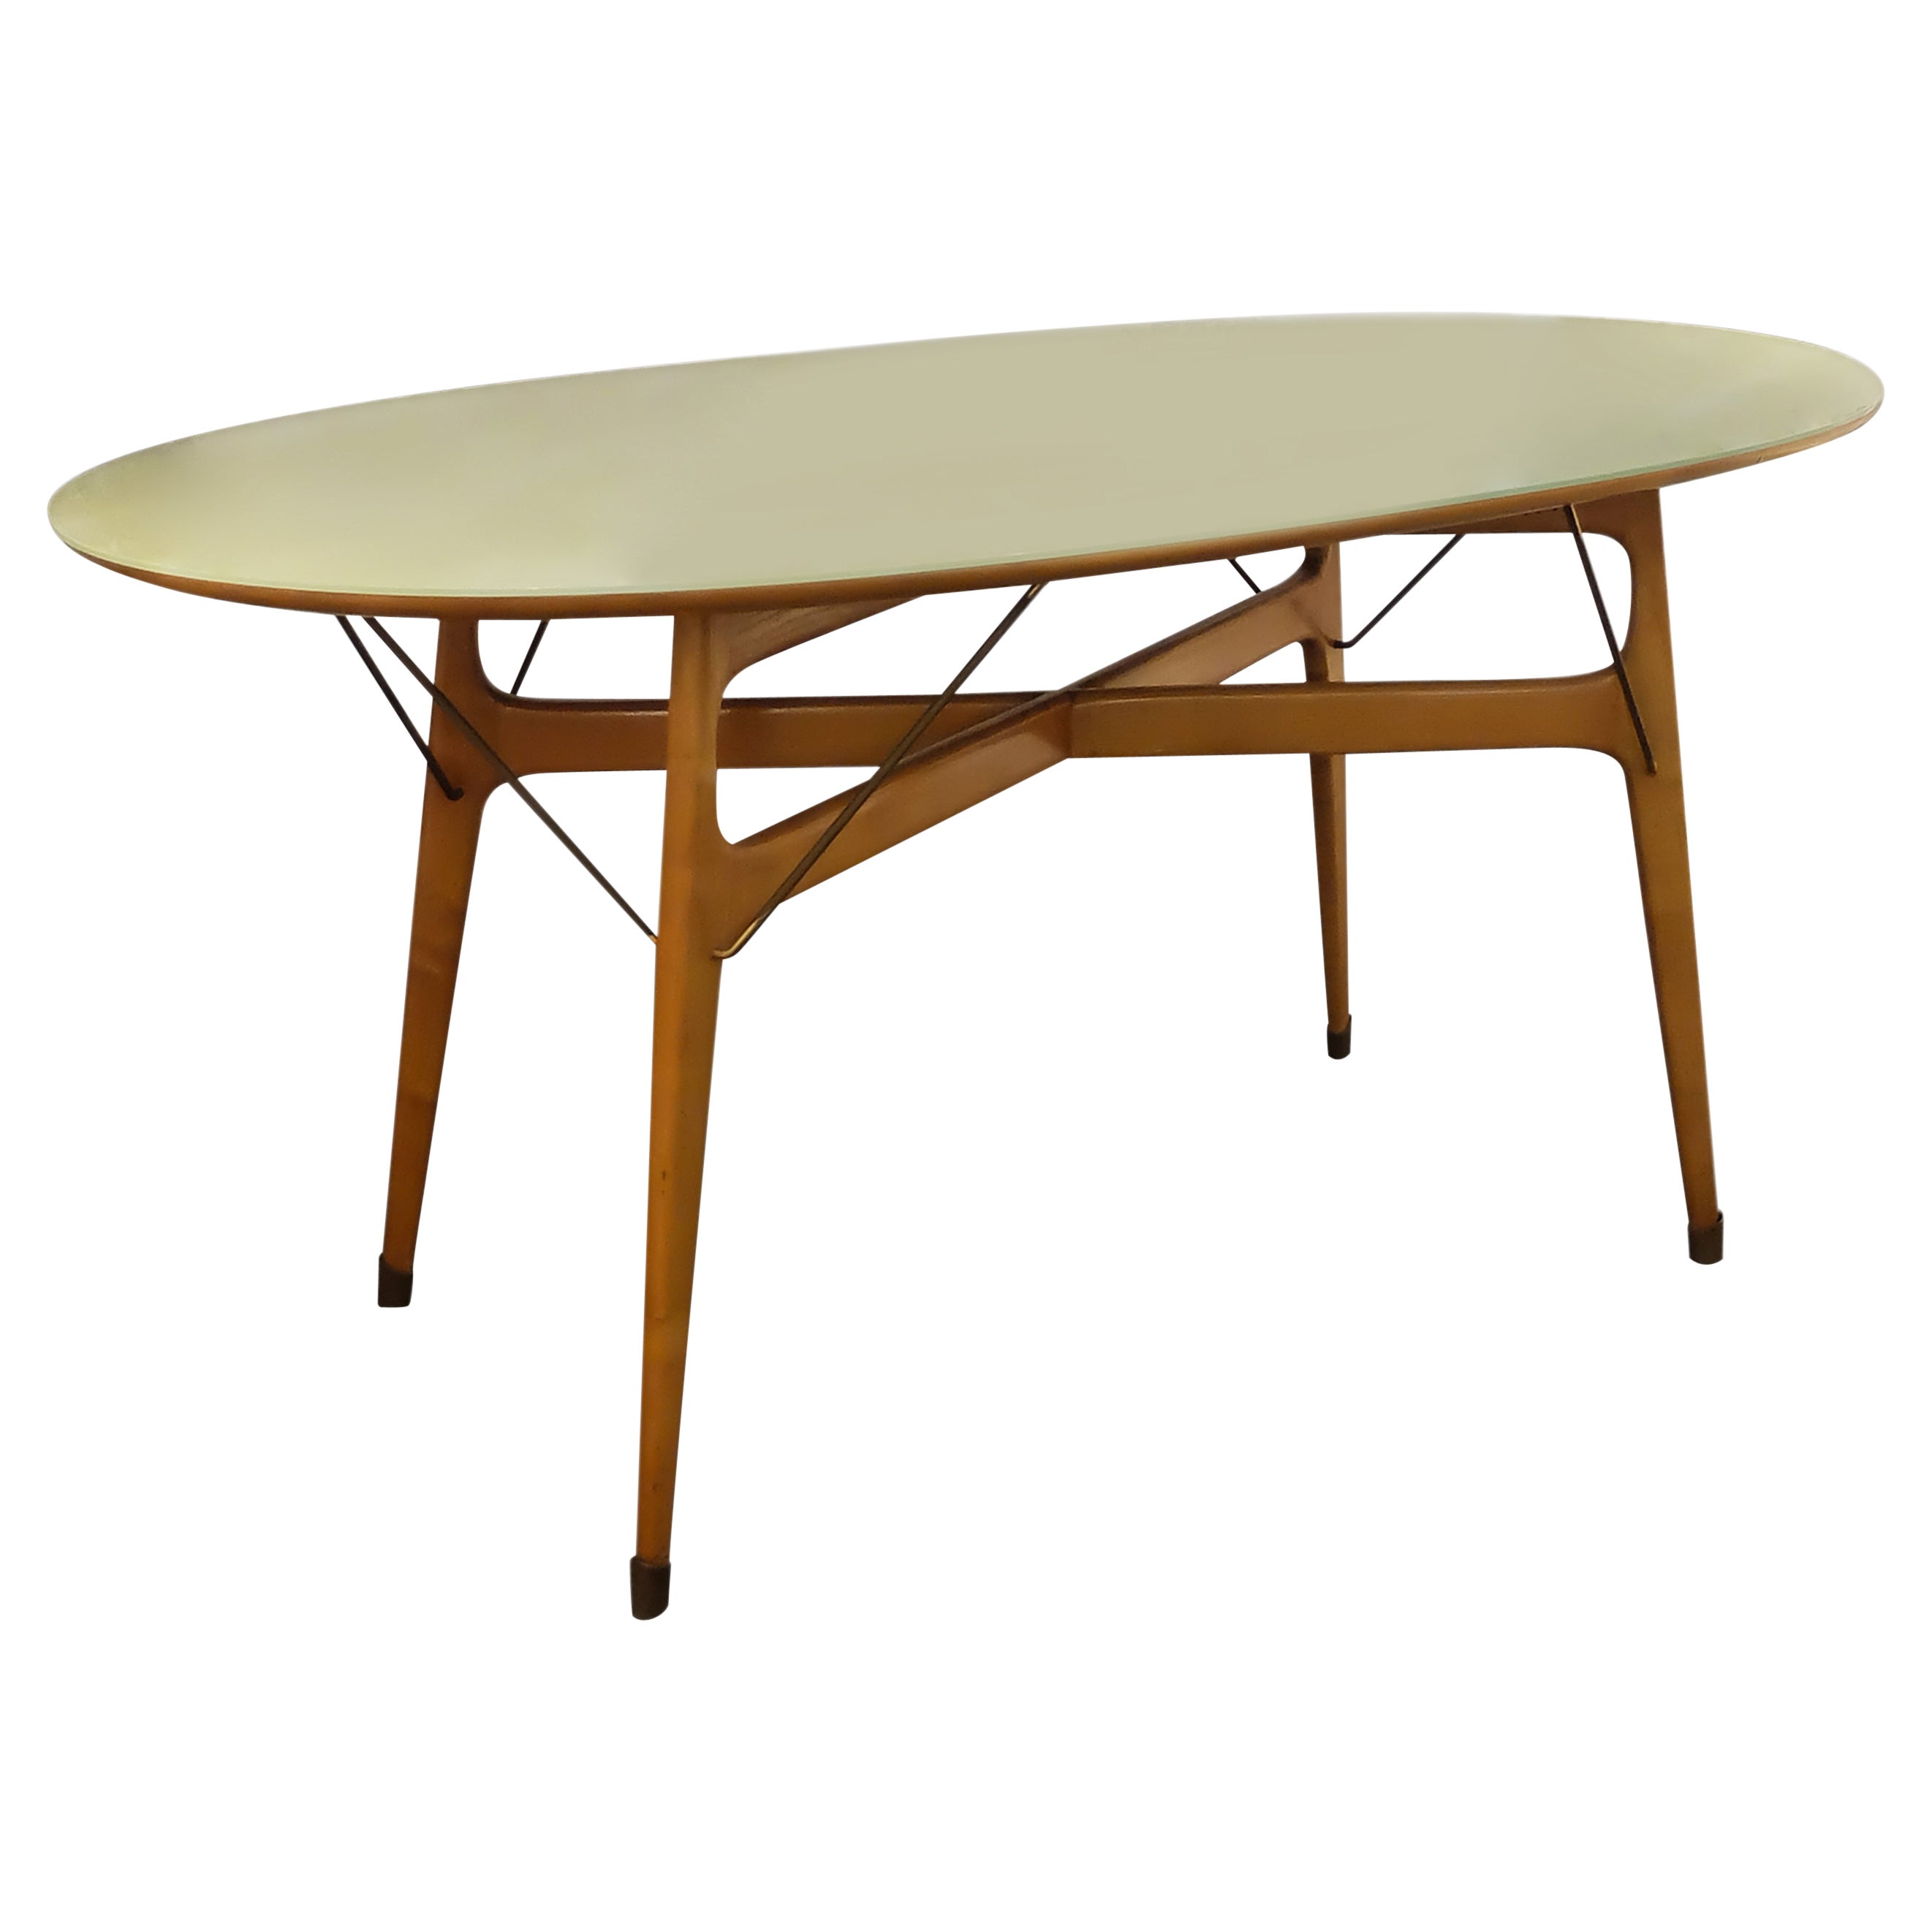 Ico and Luisa Parisi, Italian Mid-Century Modern Wooden Dining Table, circa 1950 For Sale